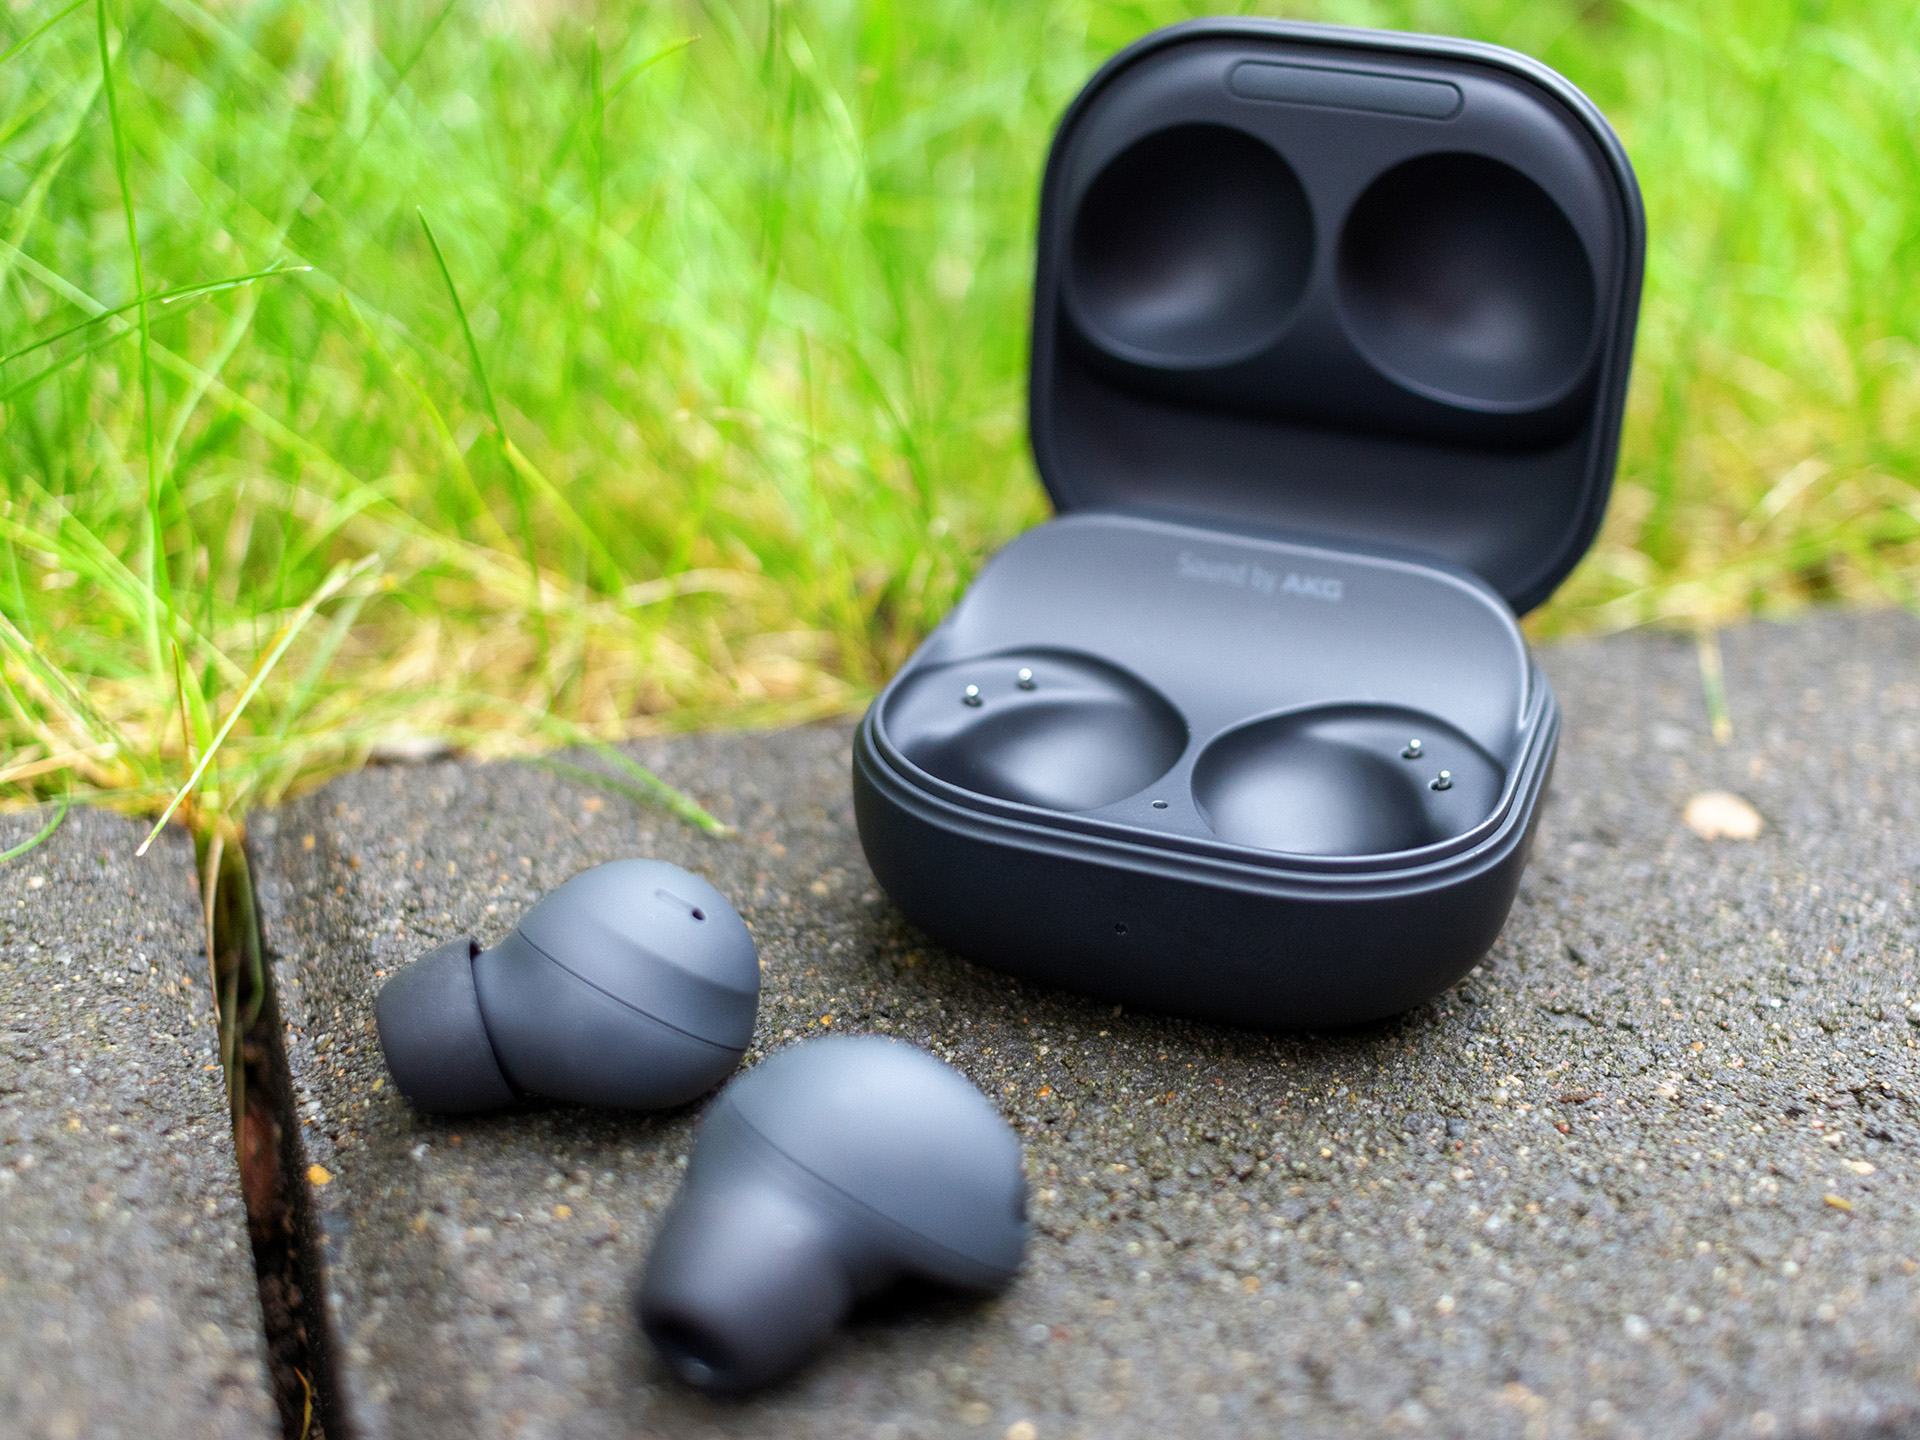 Comparison review: Samsung Galaxy Buds2 Pro vs. Huawei FreeBuds Pro 2 -   Reviews